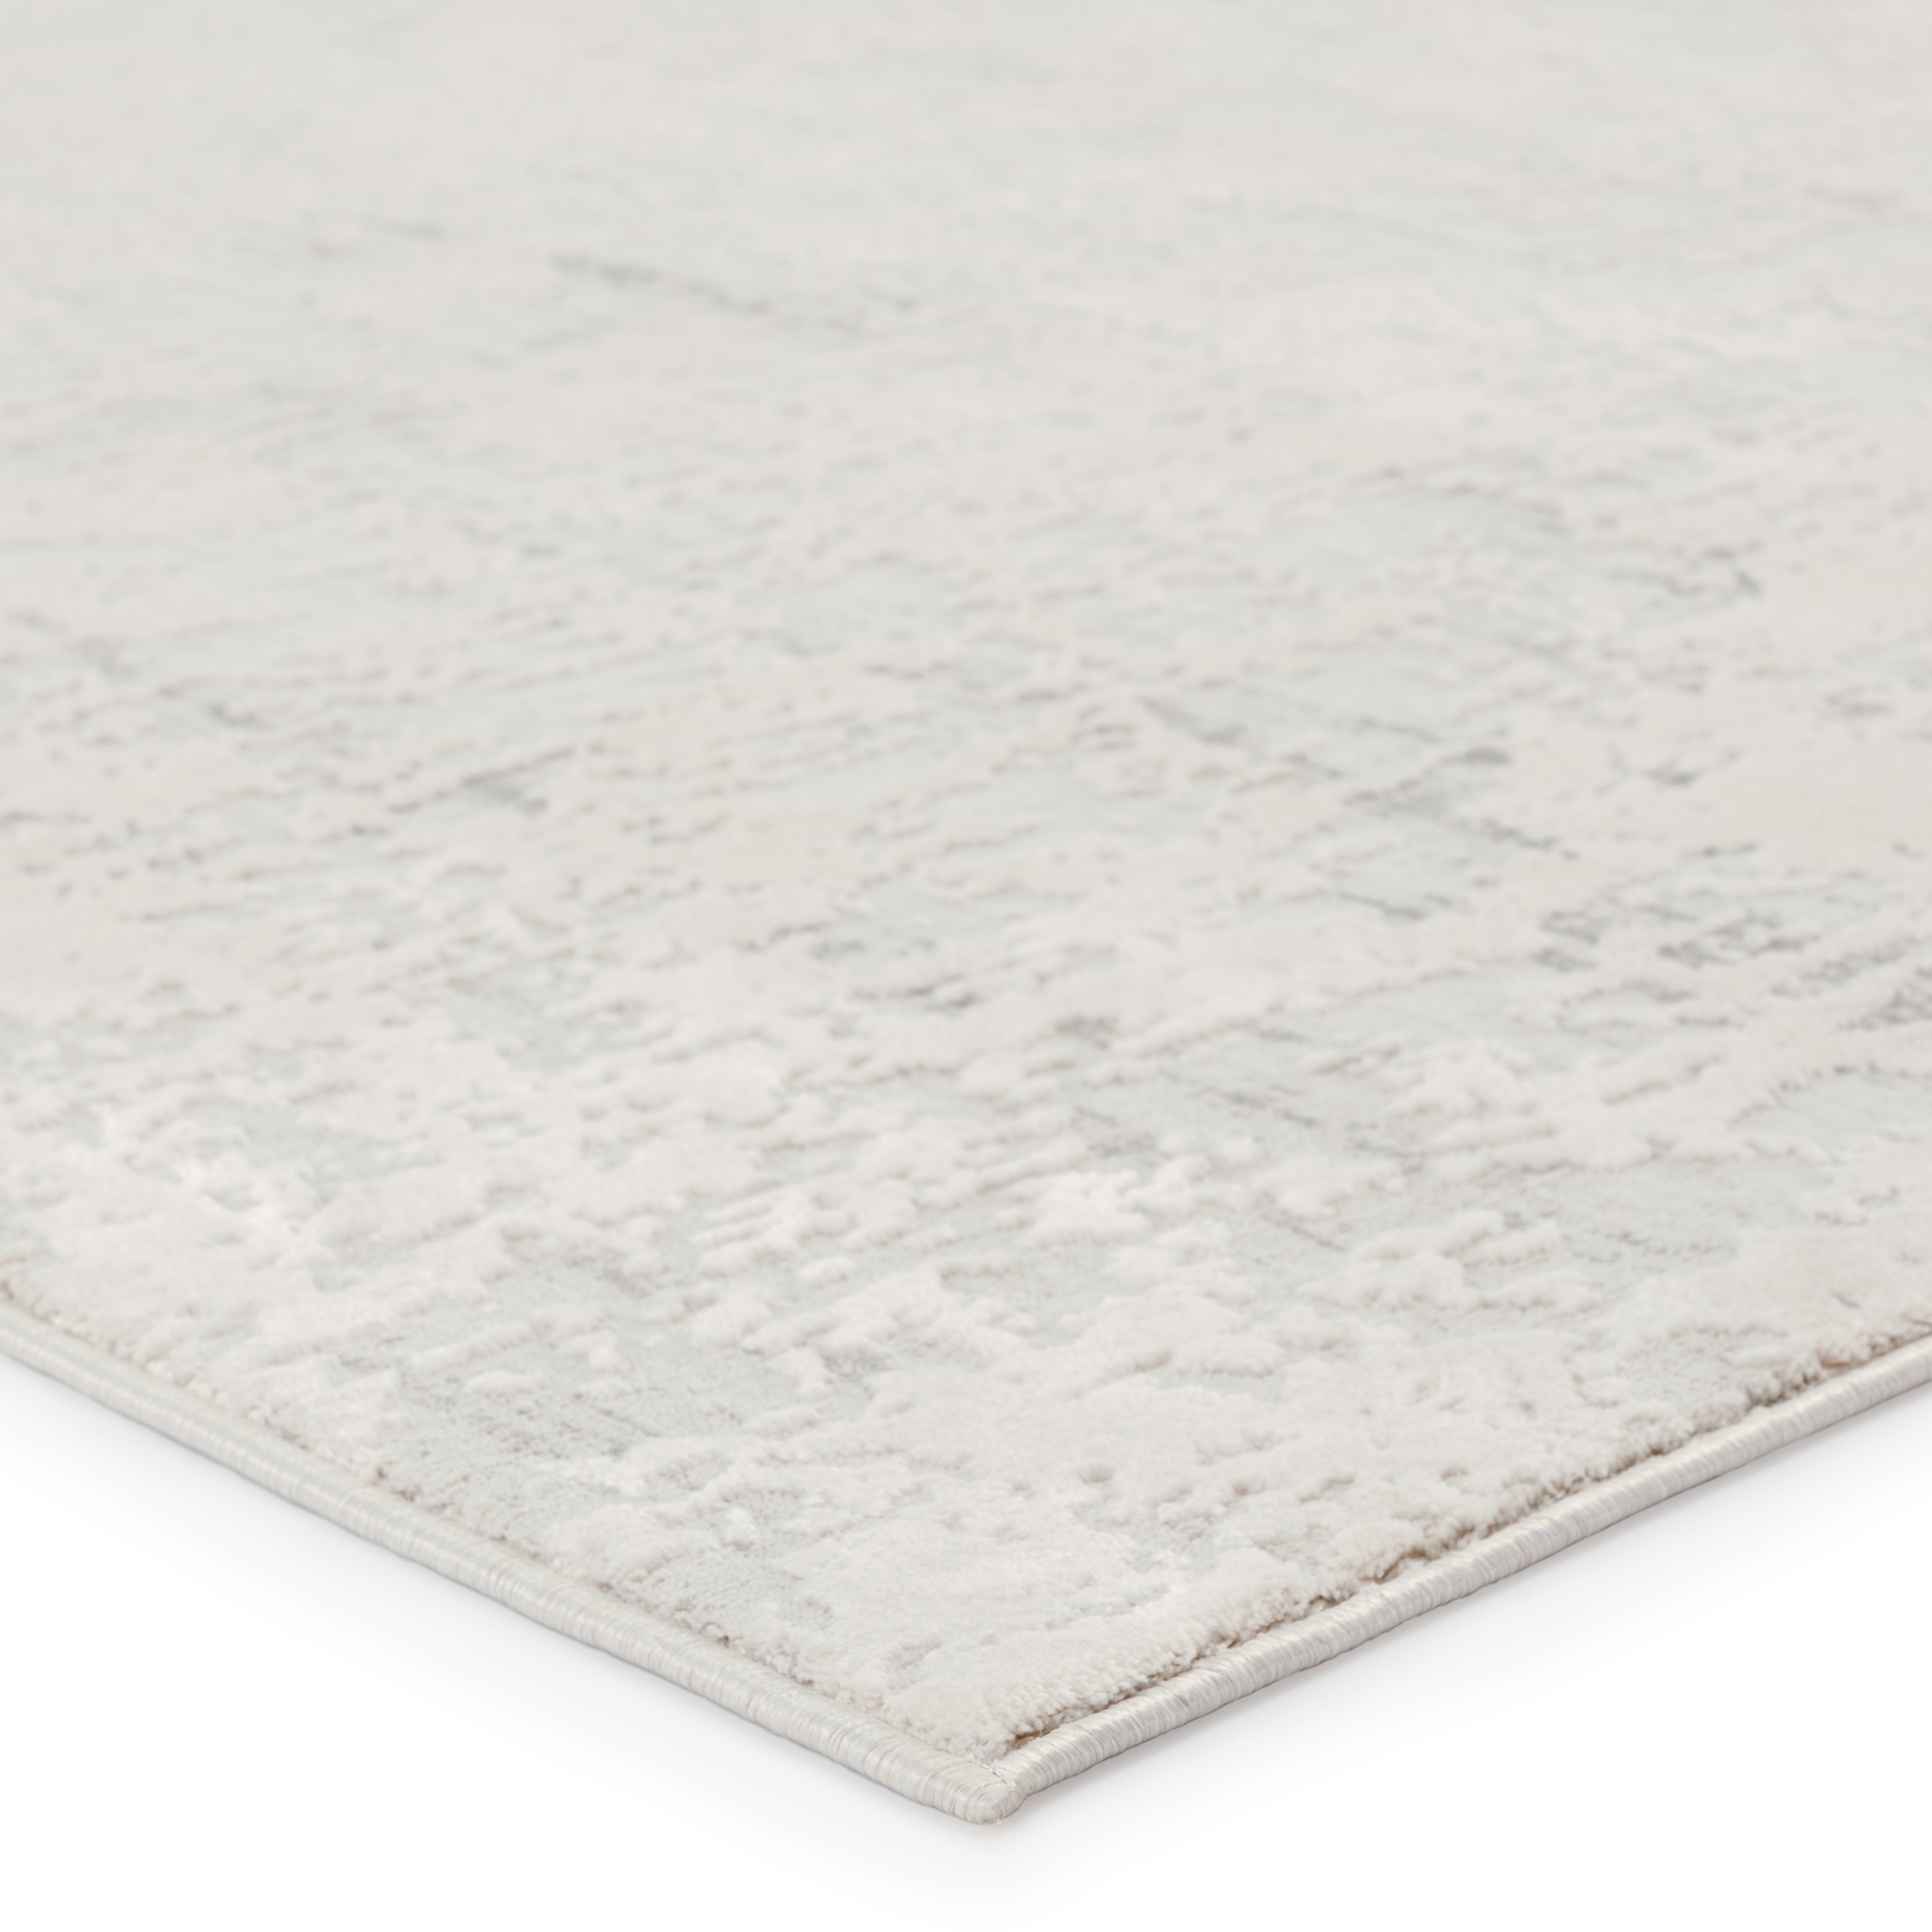 Arvo Abstract Silver/ White Area Rug (12'X15') - Image 1